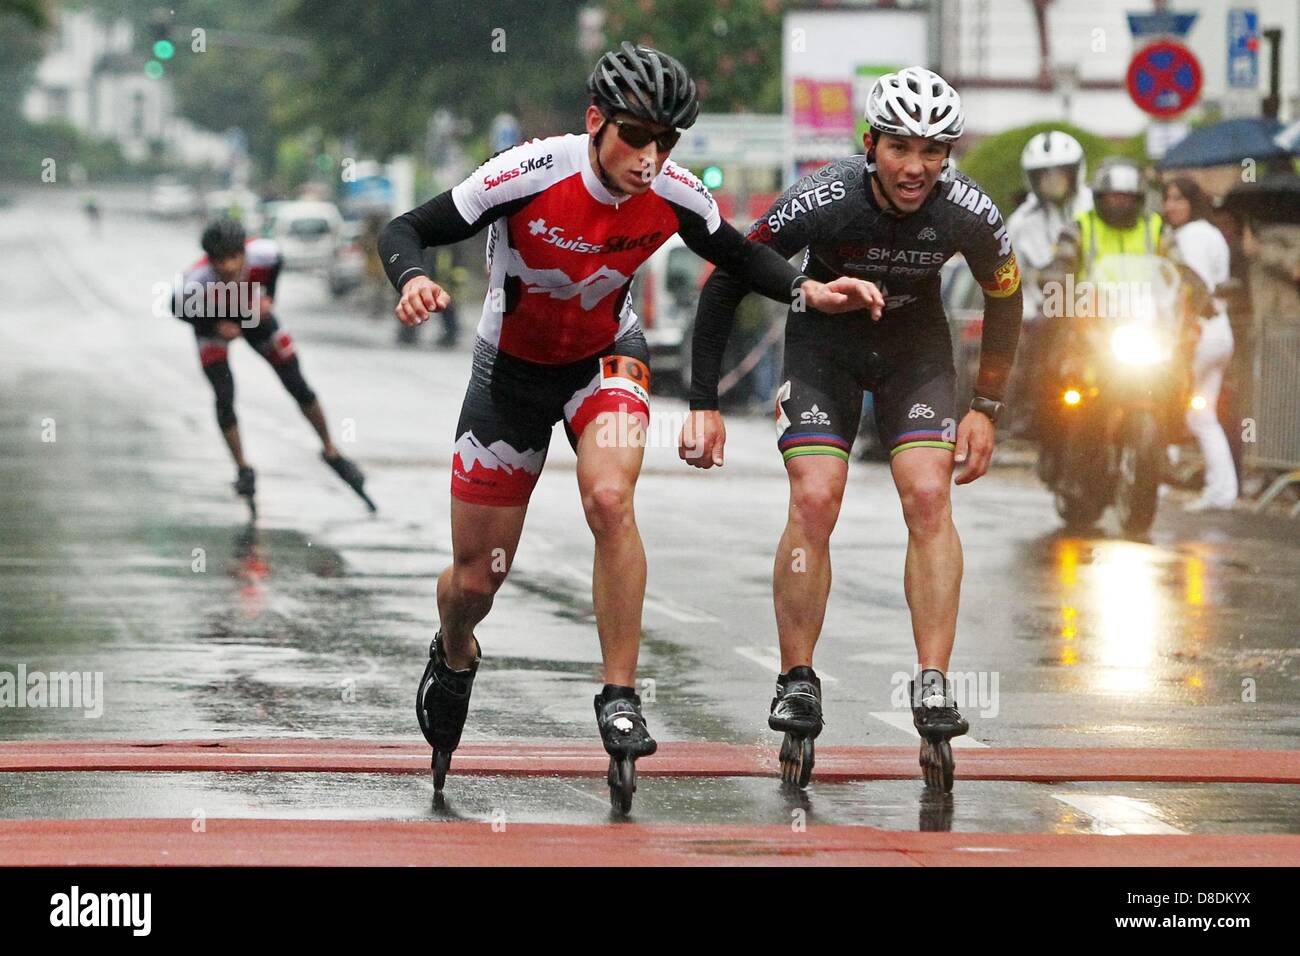 Switzerland's Severin Widmer (L) wins the inline-skating event of Middle  Rhine Marathon in front of compatriot Julien Levrard in Koblenz, Germany,  26 May 2013. Arond 6,000 runners and skaters took part in